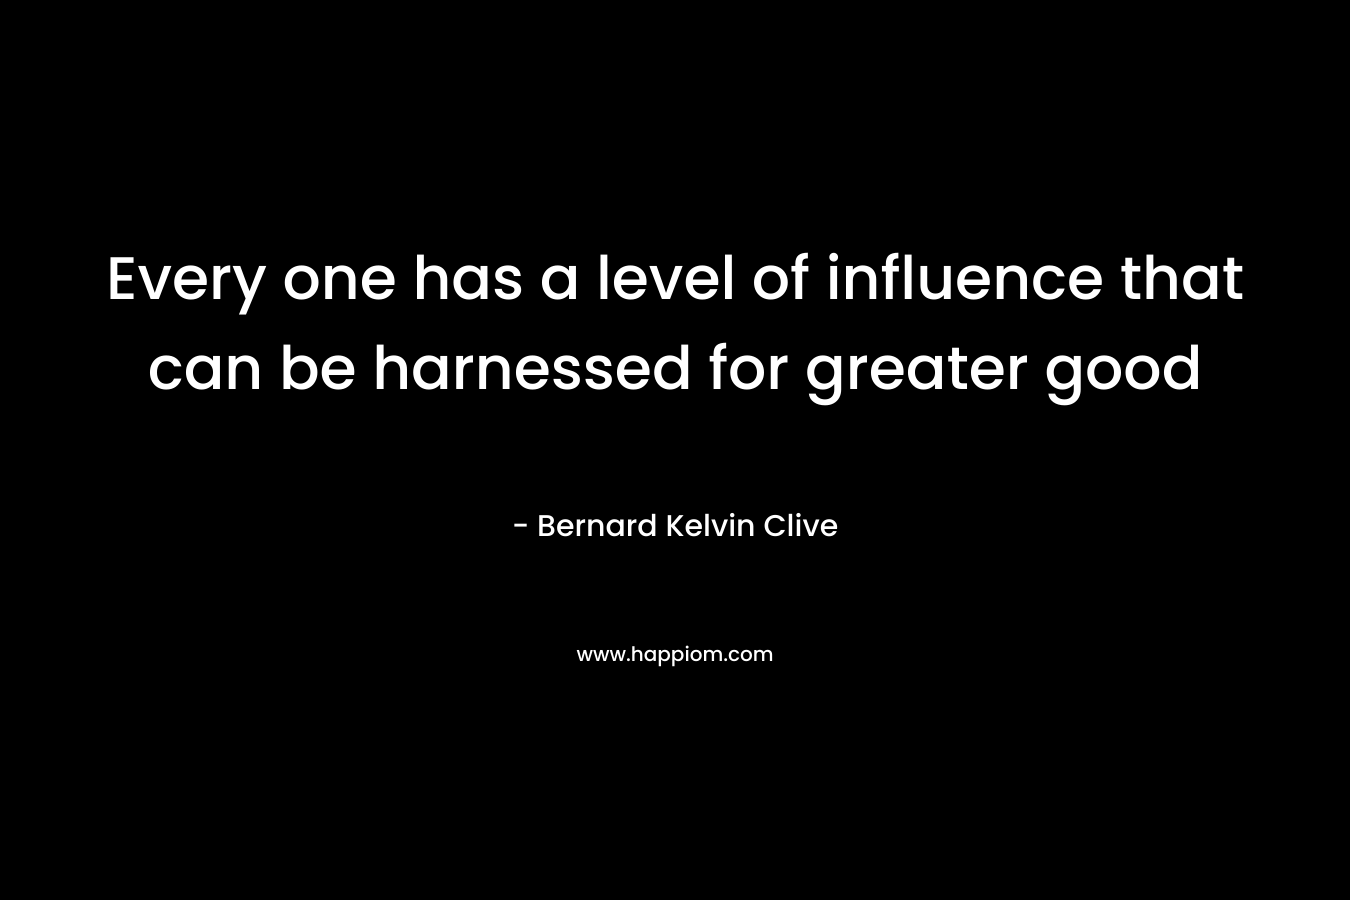 Every one has a level of influence that can be harnessed for greater good – Bernard Kelvin Clive